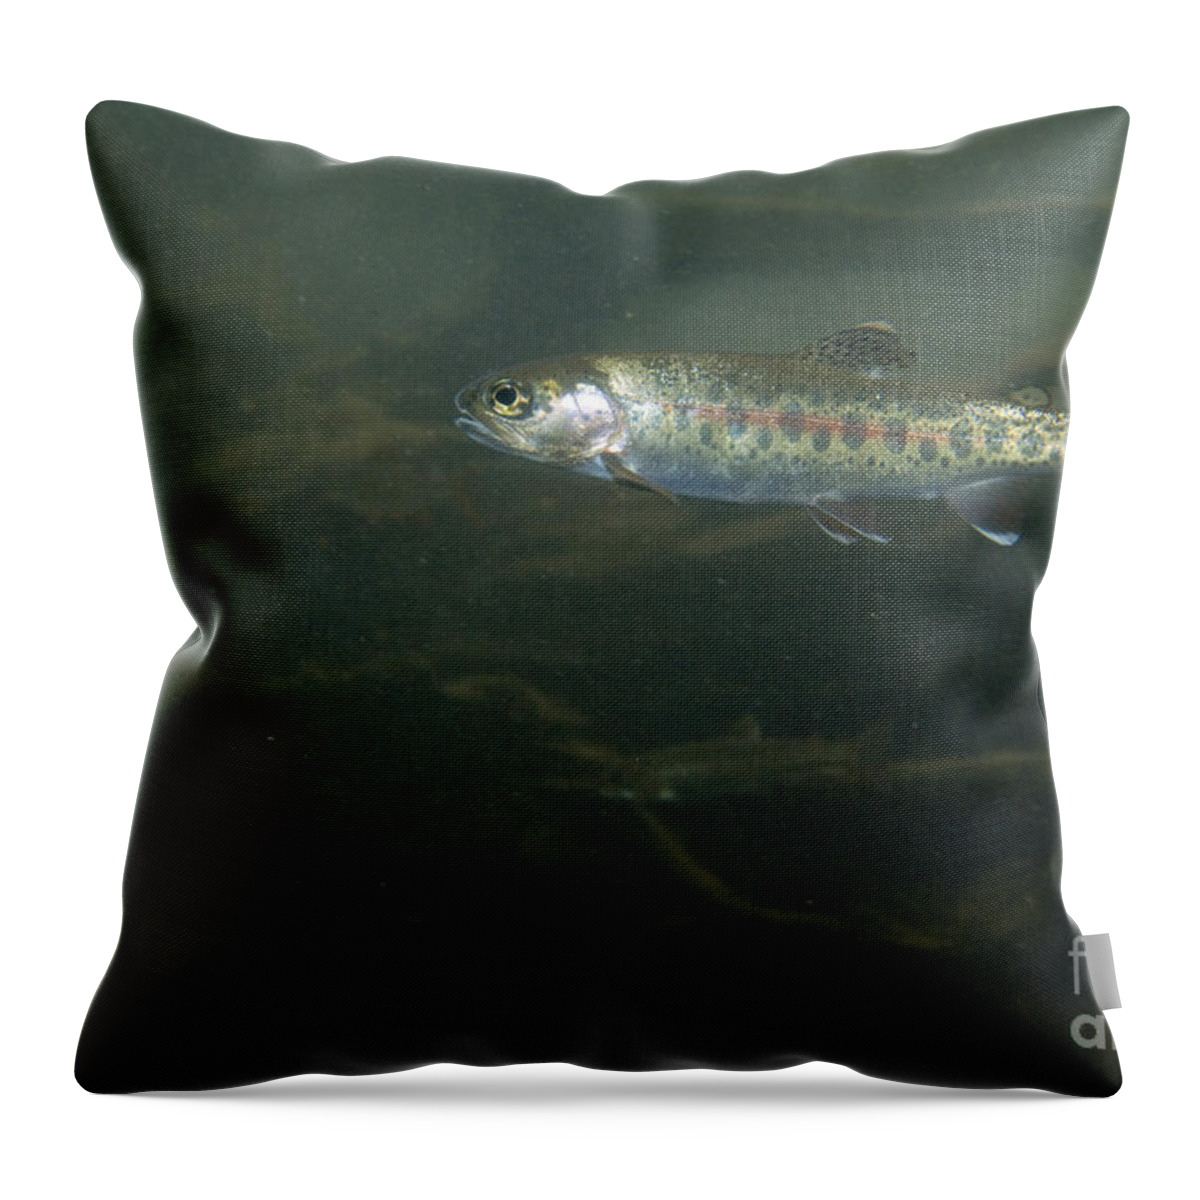 Redband Trout Throw Pillow featuring the photograph Redband Trout by William H. Mullins